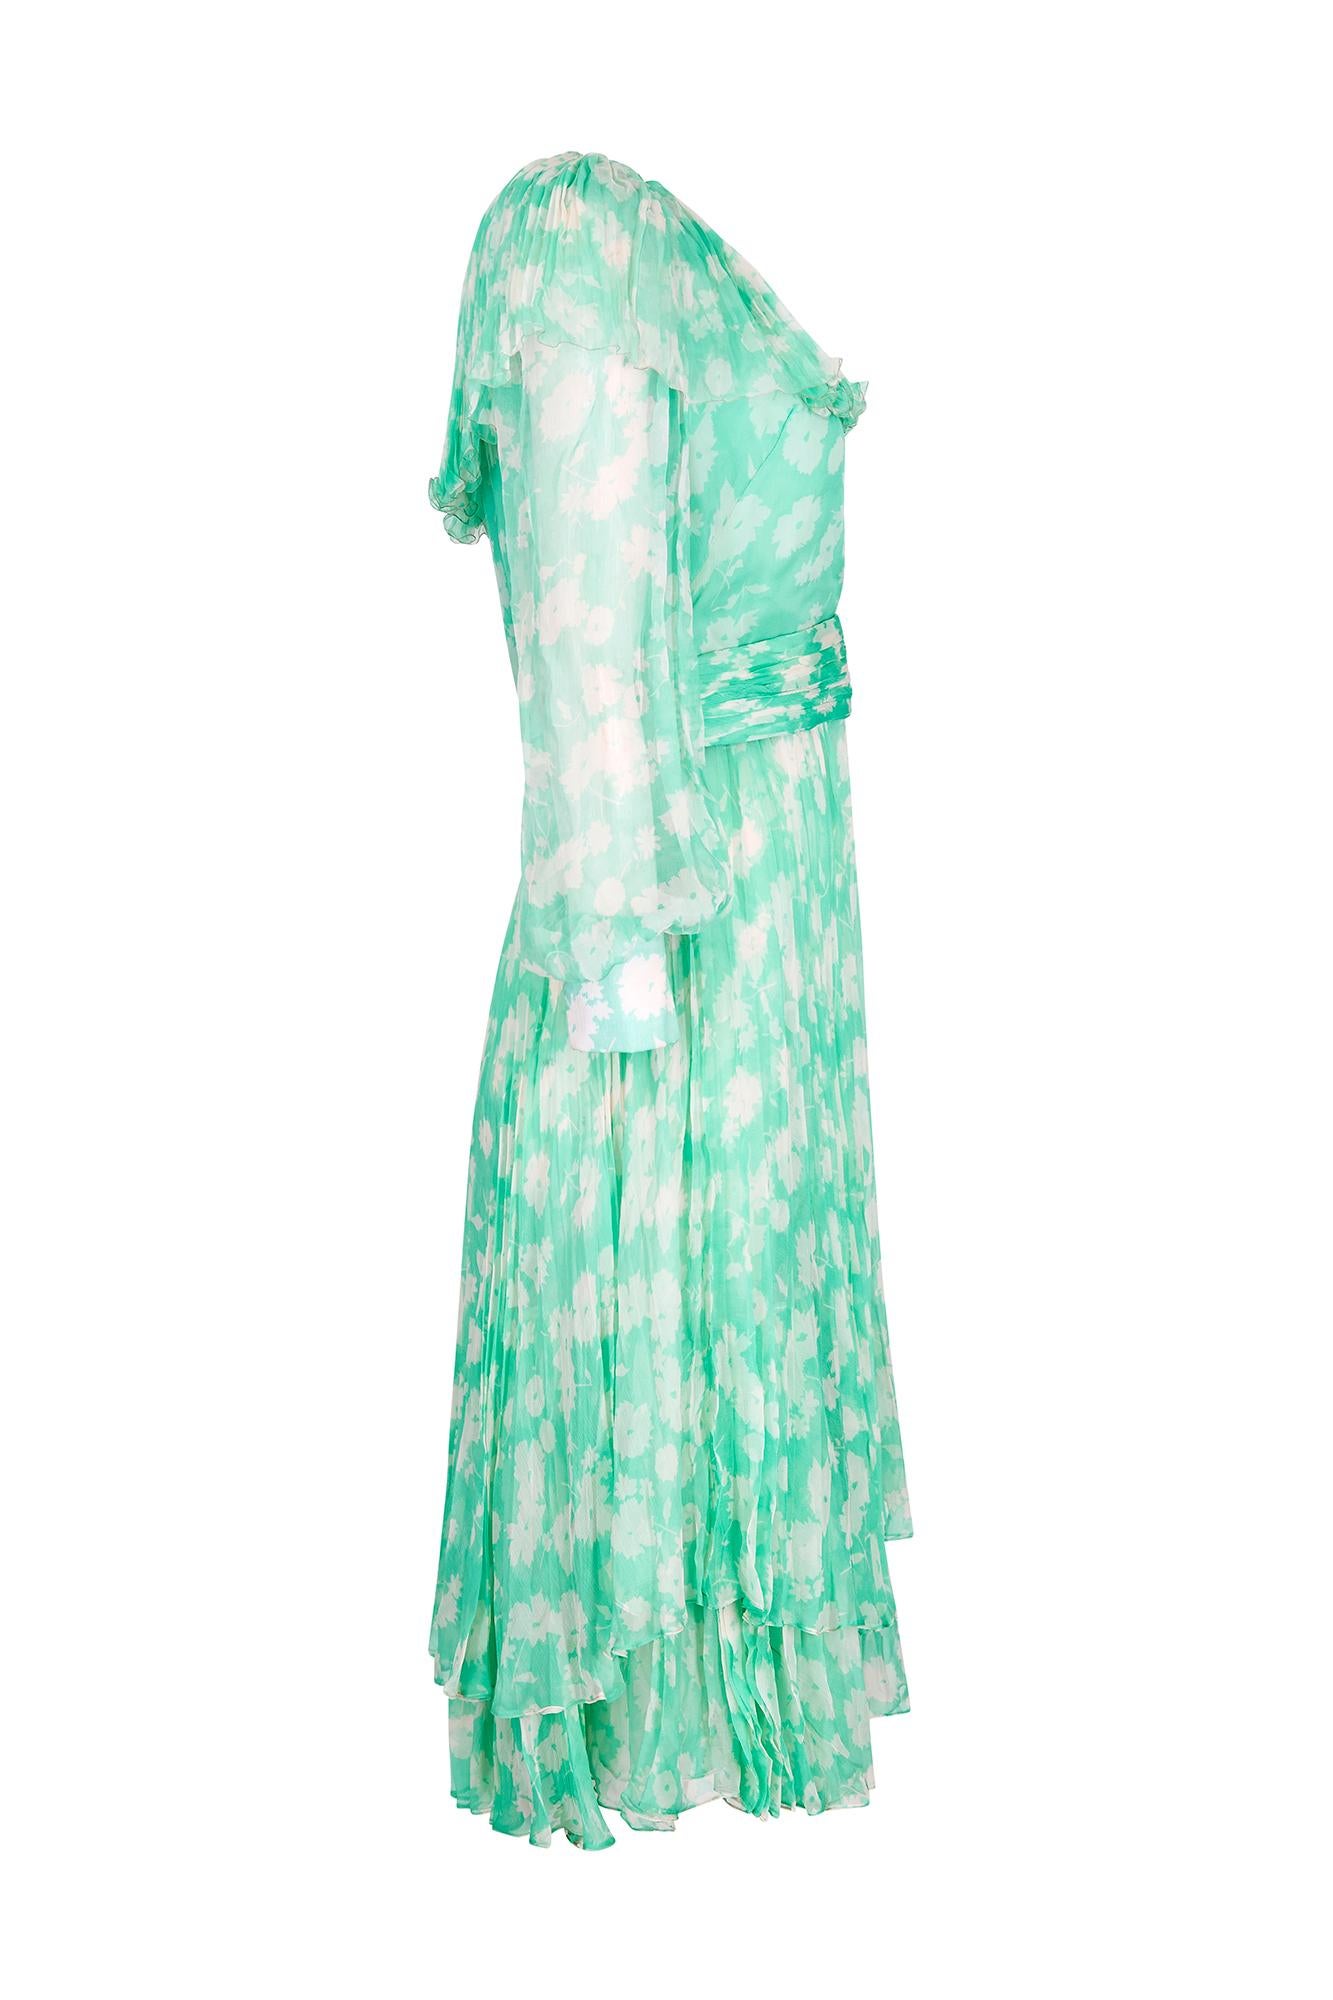 This charming 1970s printed silk chiffon dress in seafoam green and white, is labelled Harry Algo, Paris, and is in beautiful vintage condition. The dress is a simple shift cut, with darting below the bust and a neatly cinched waistline. There is a